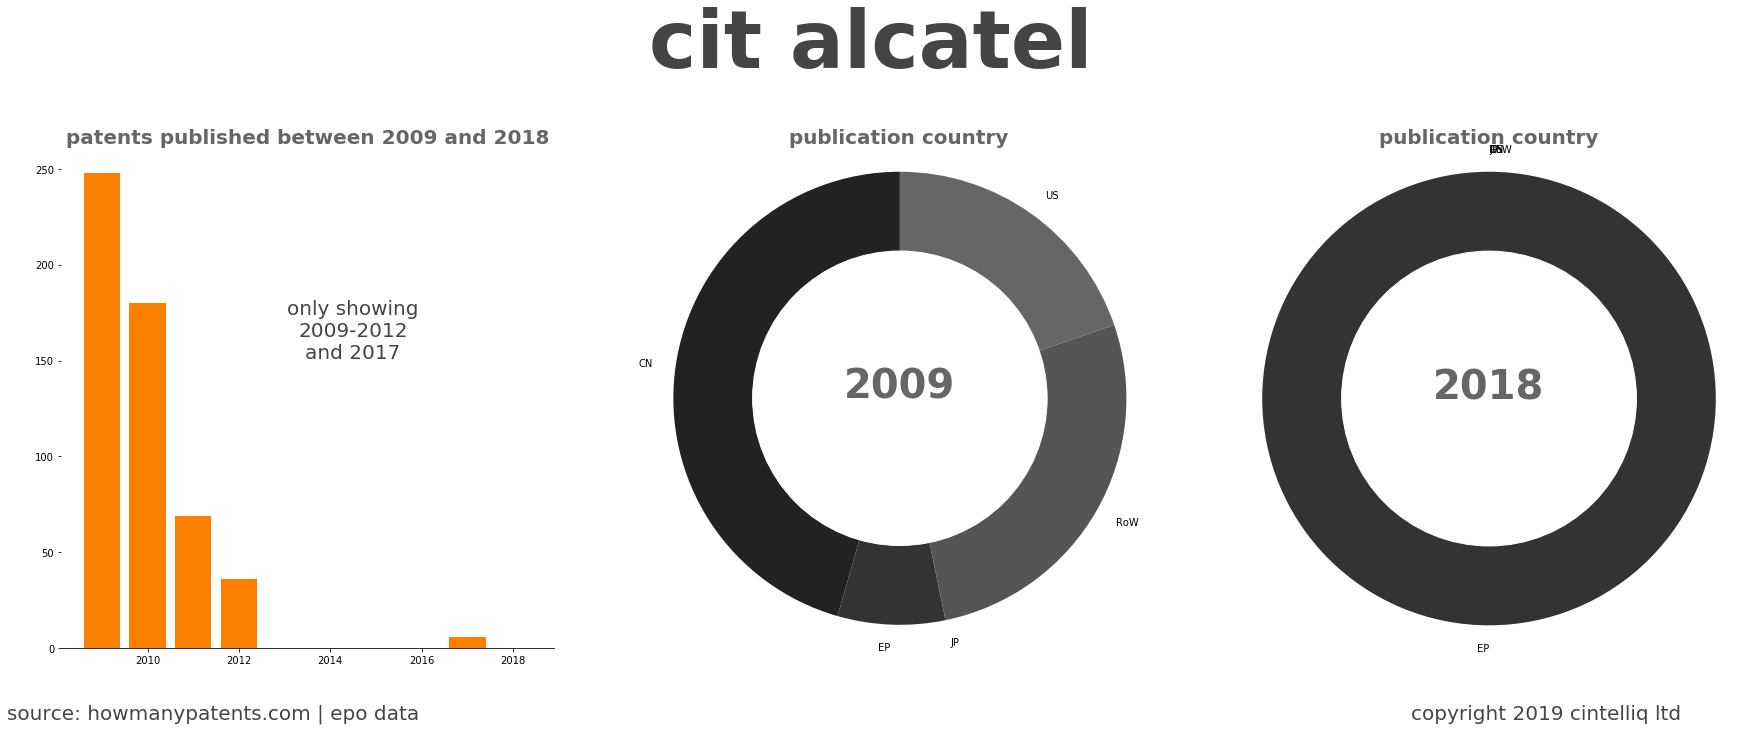 summary of patents for Cit Alcatel